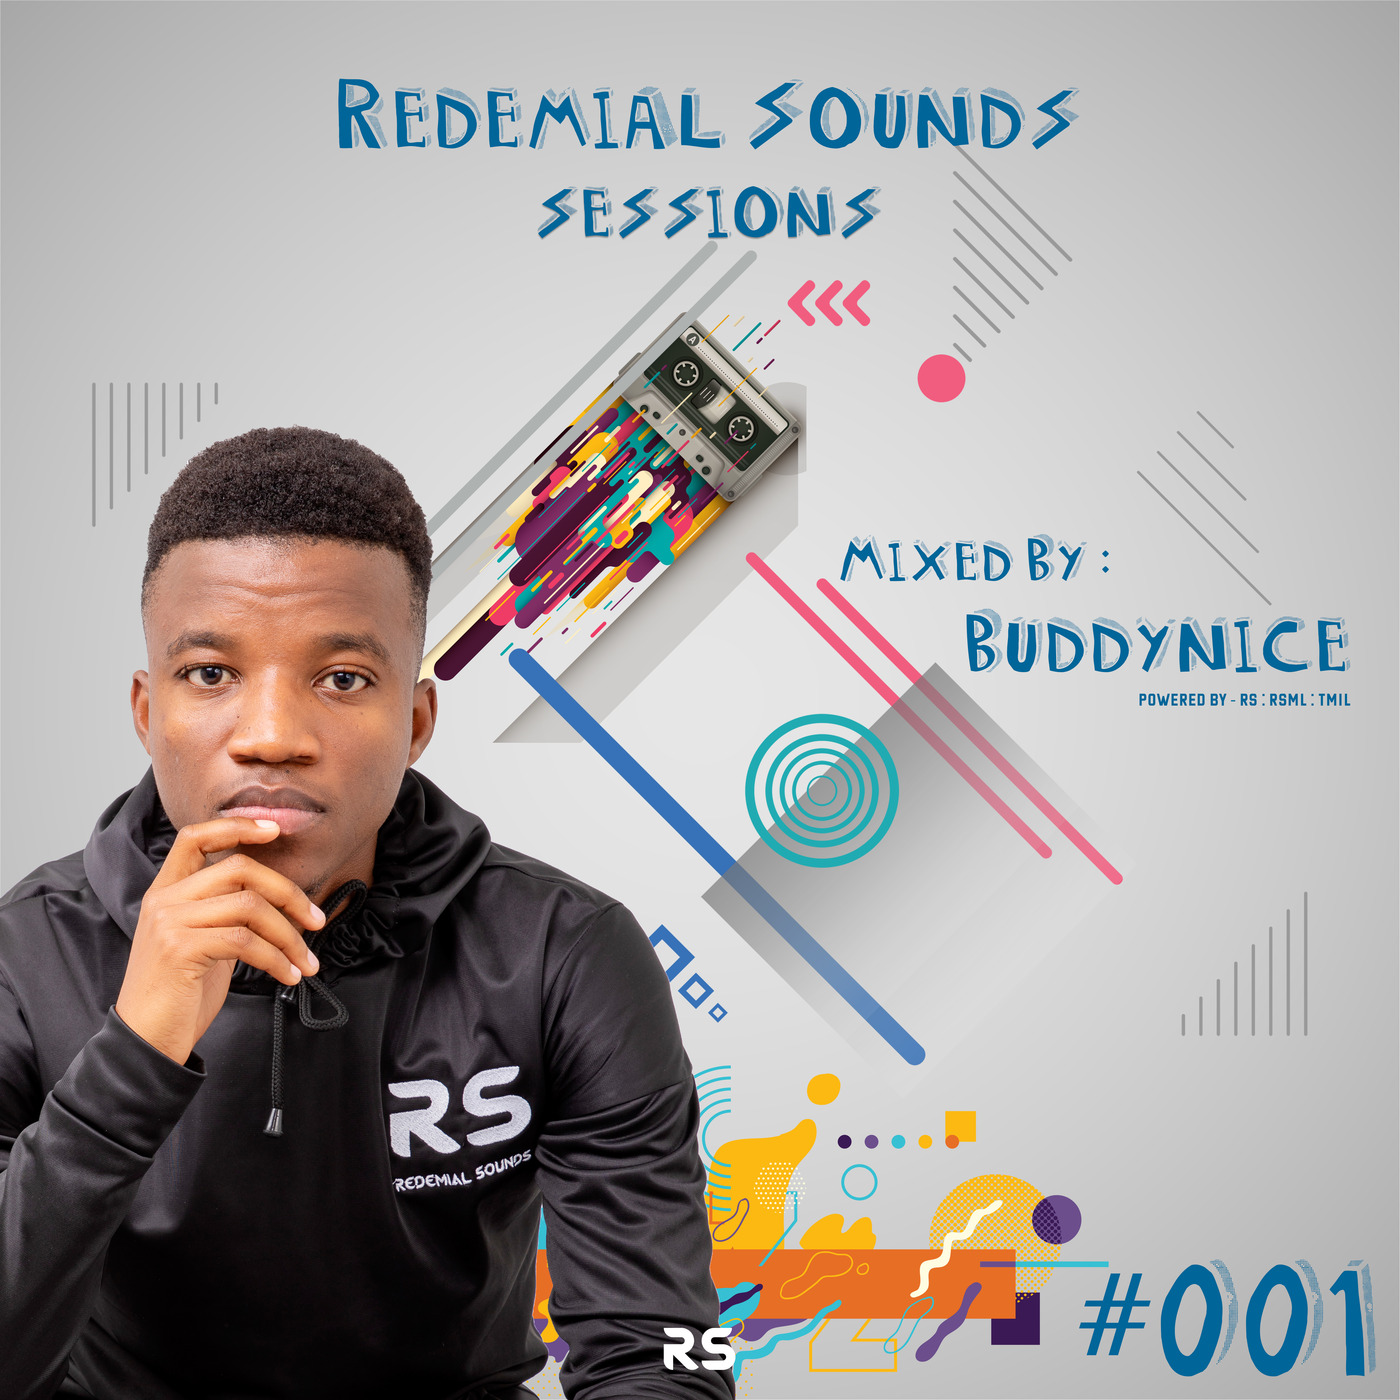 Redemial Sounds Sessions #001 (Mixed by Buddynice)